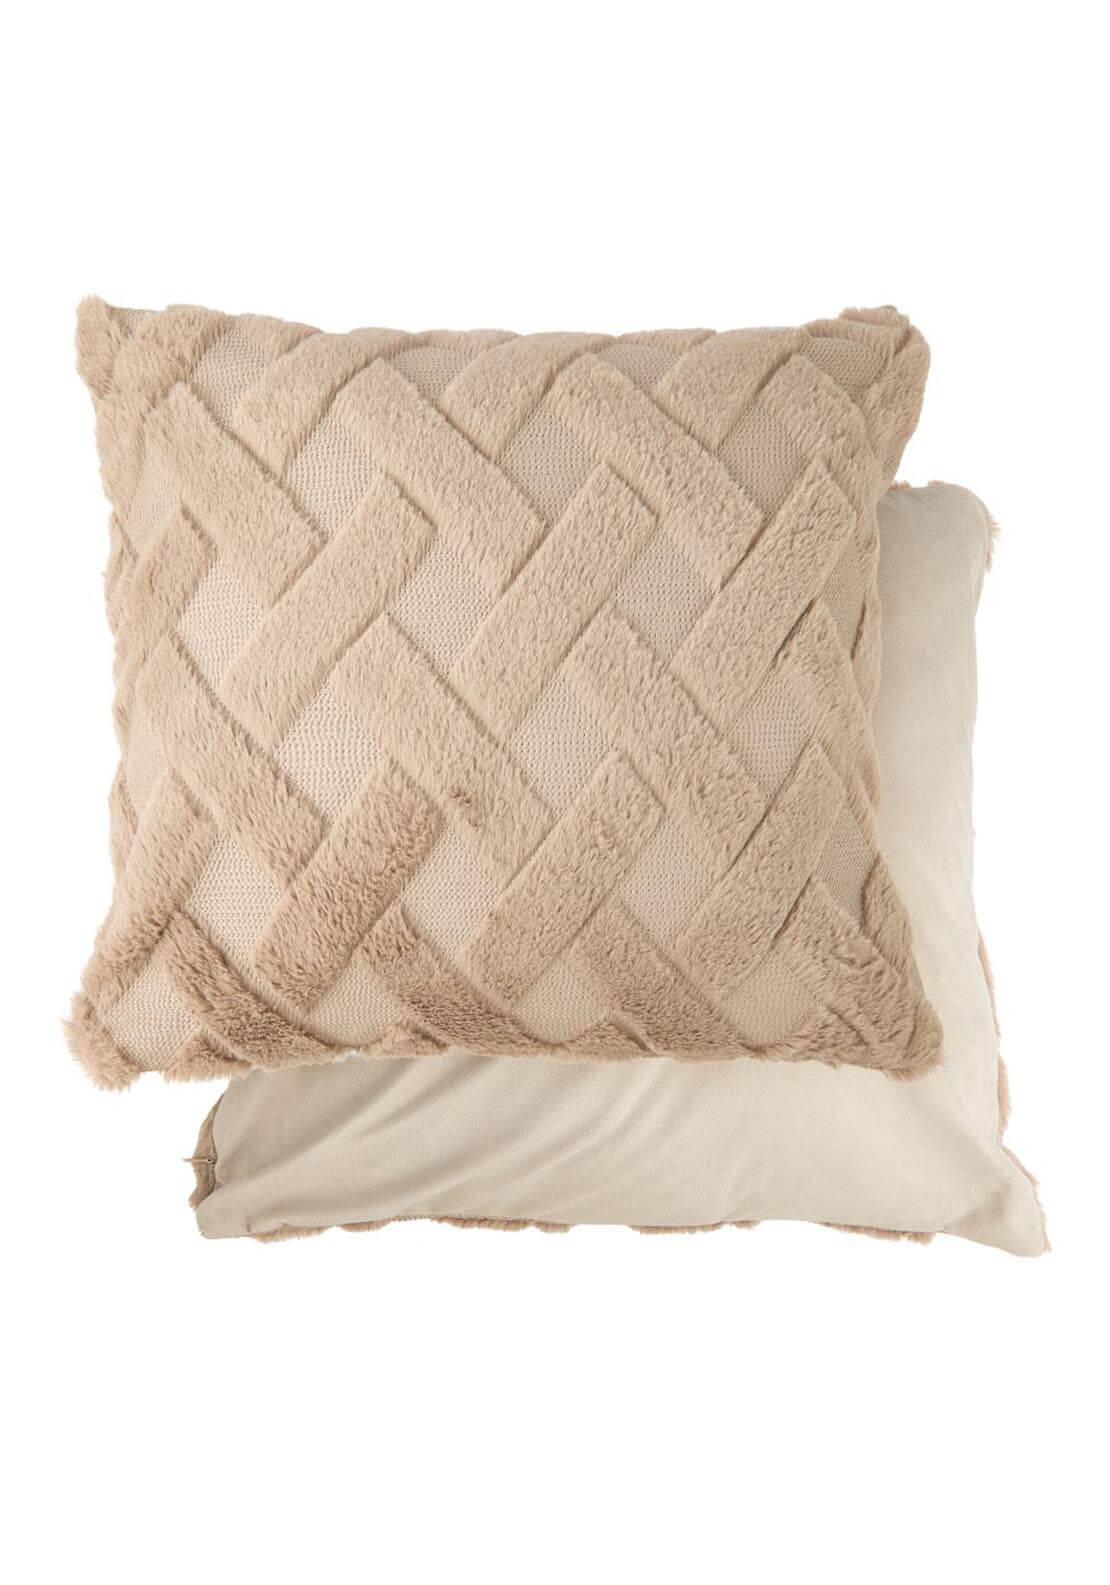 The Home Collection Nyla Cushion - Taupe 2 Shaws Department Stores